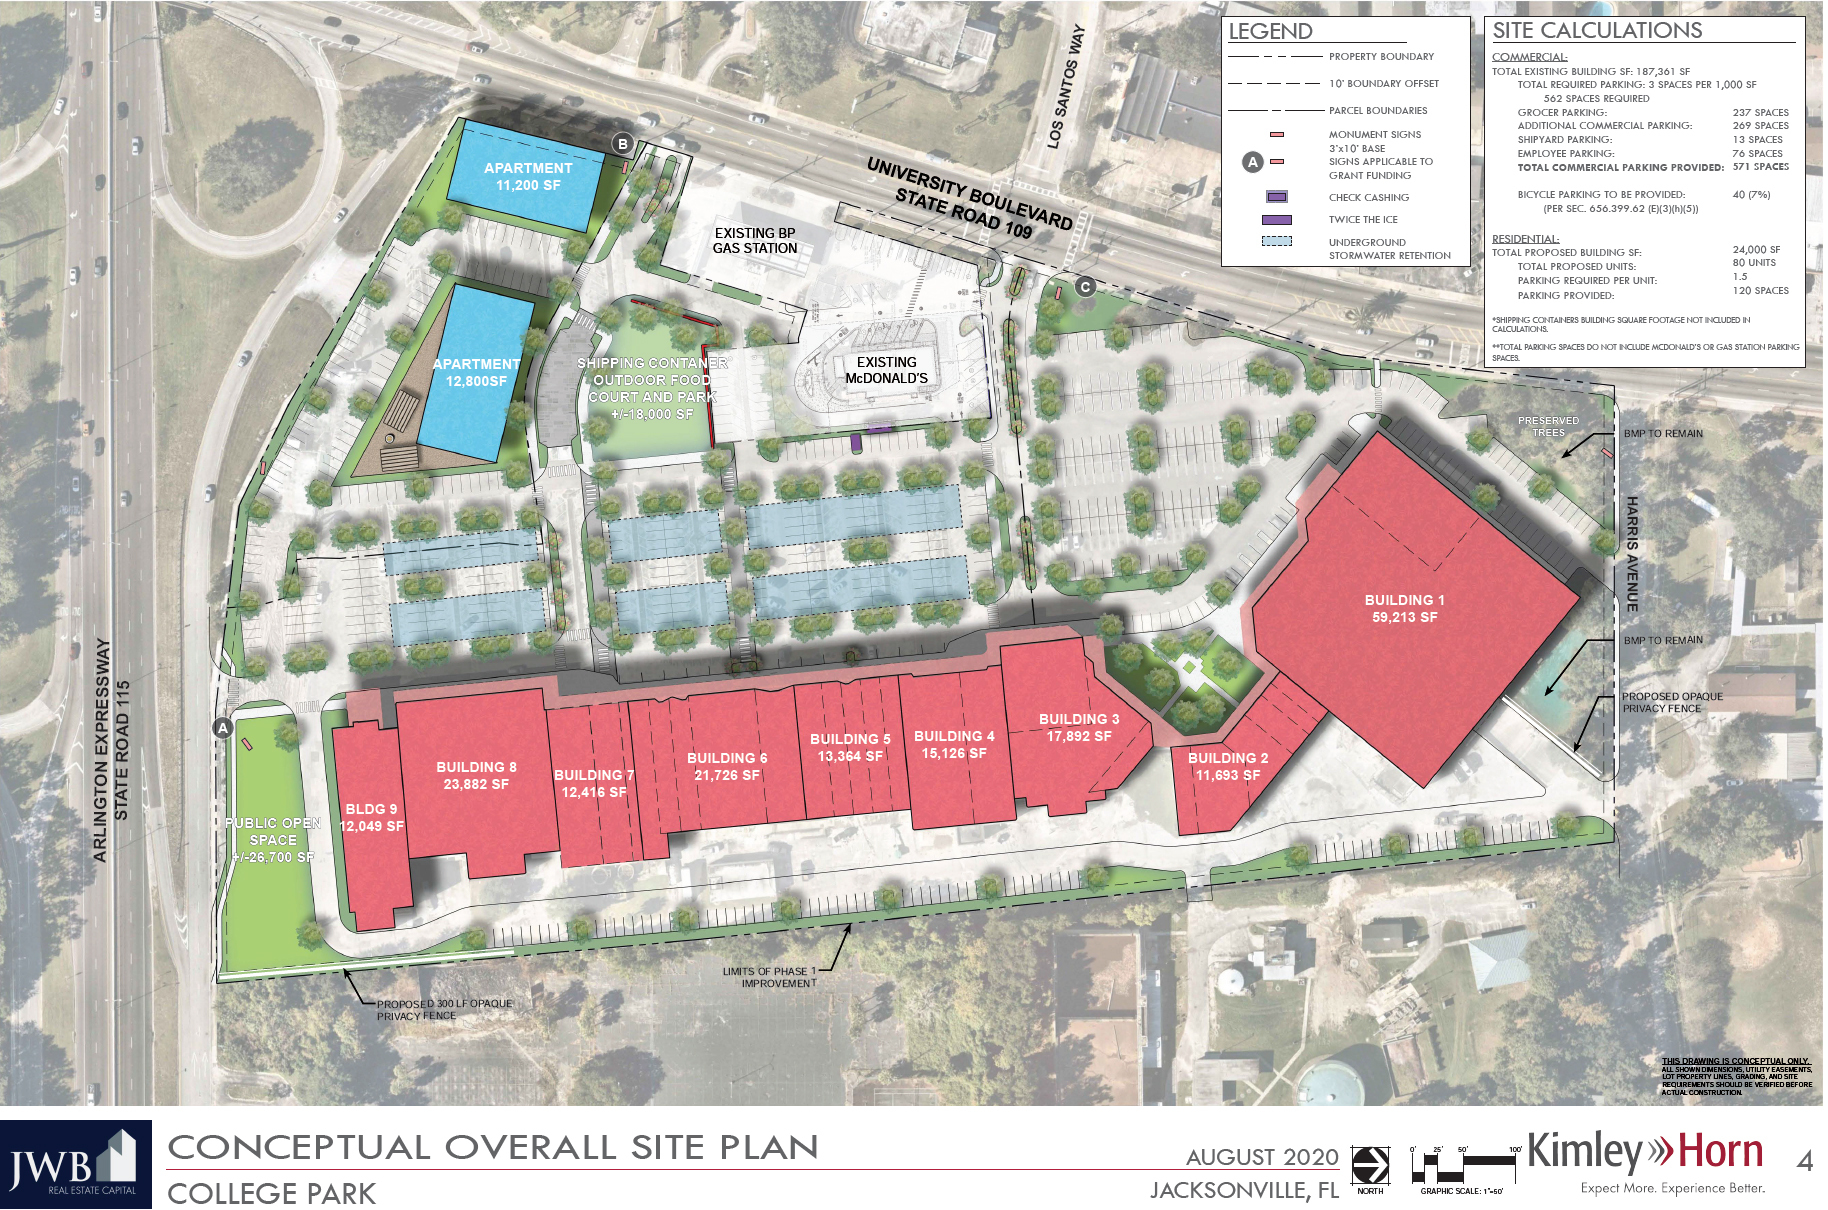 The site plan for College Park.